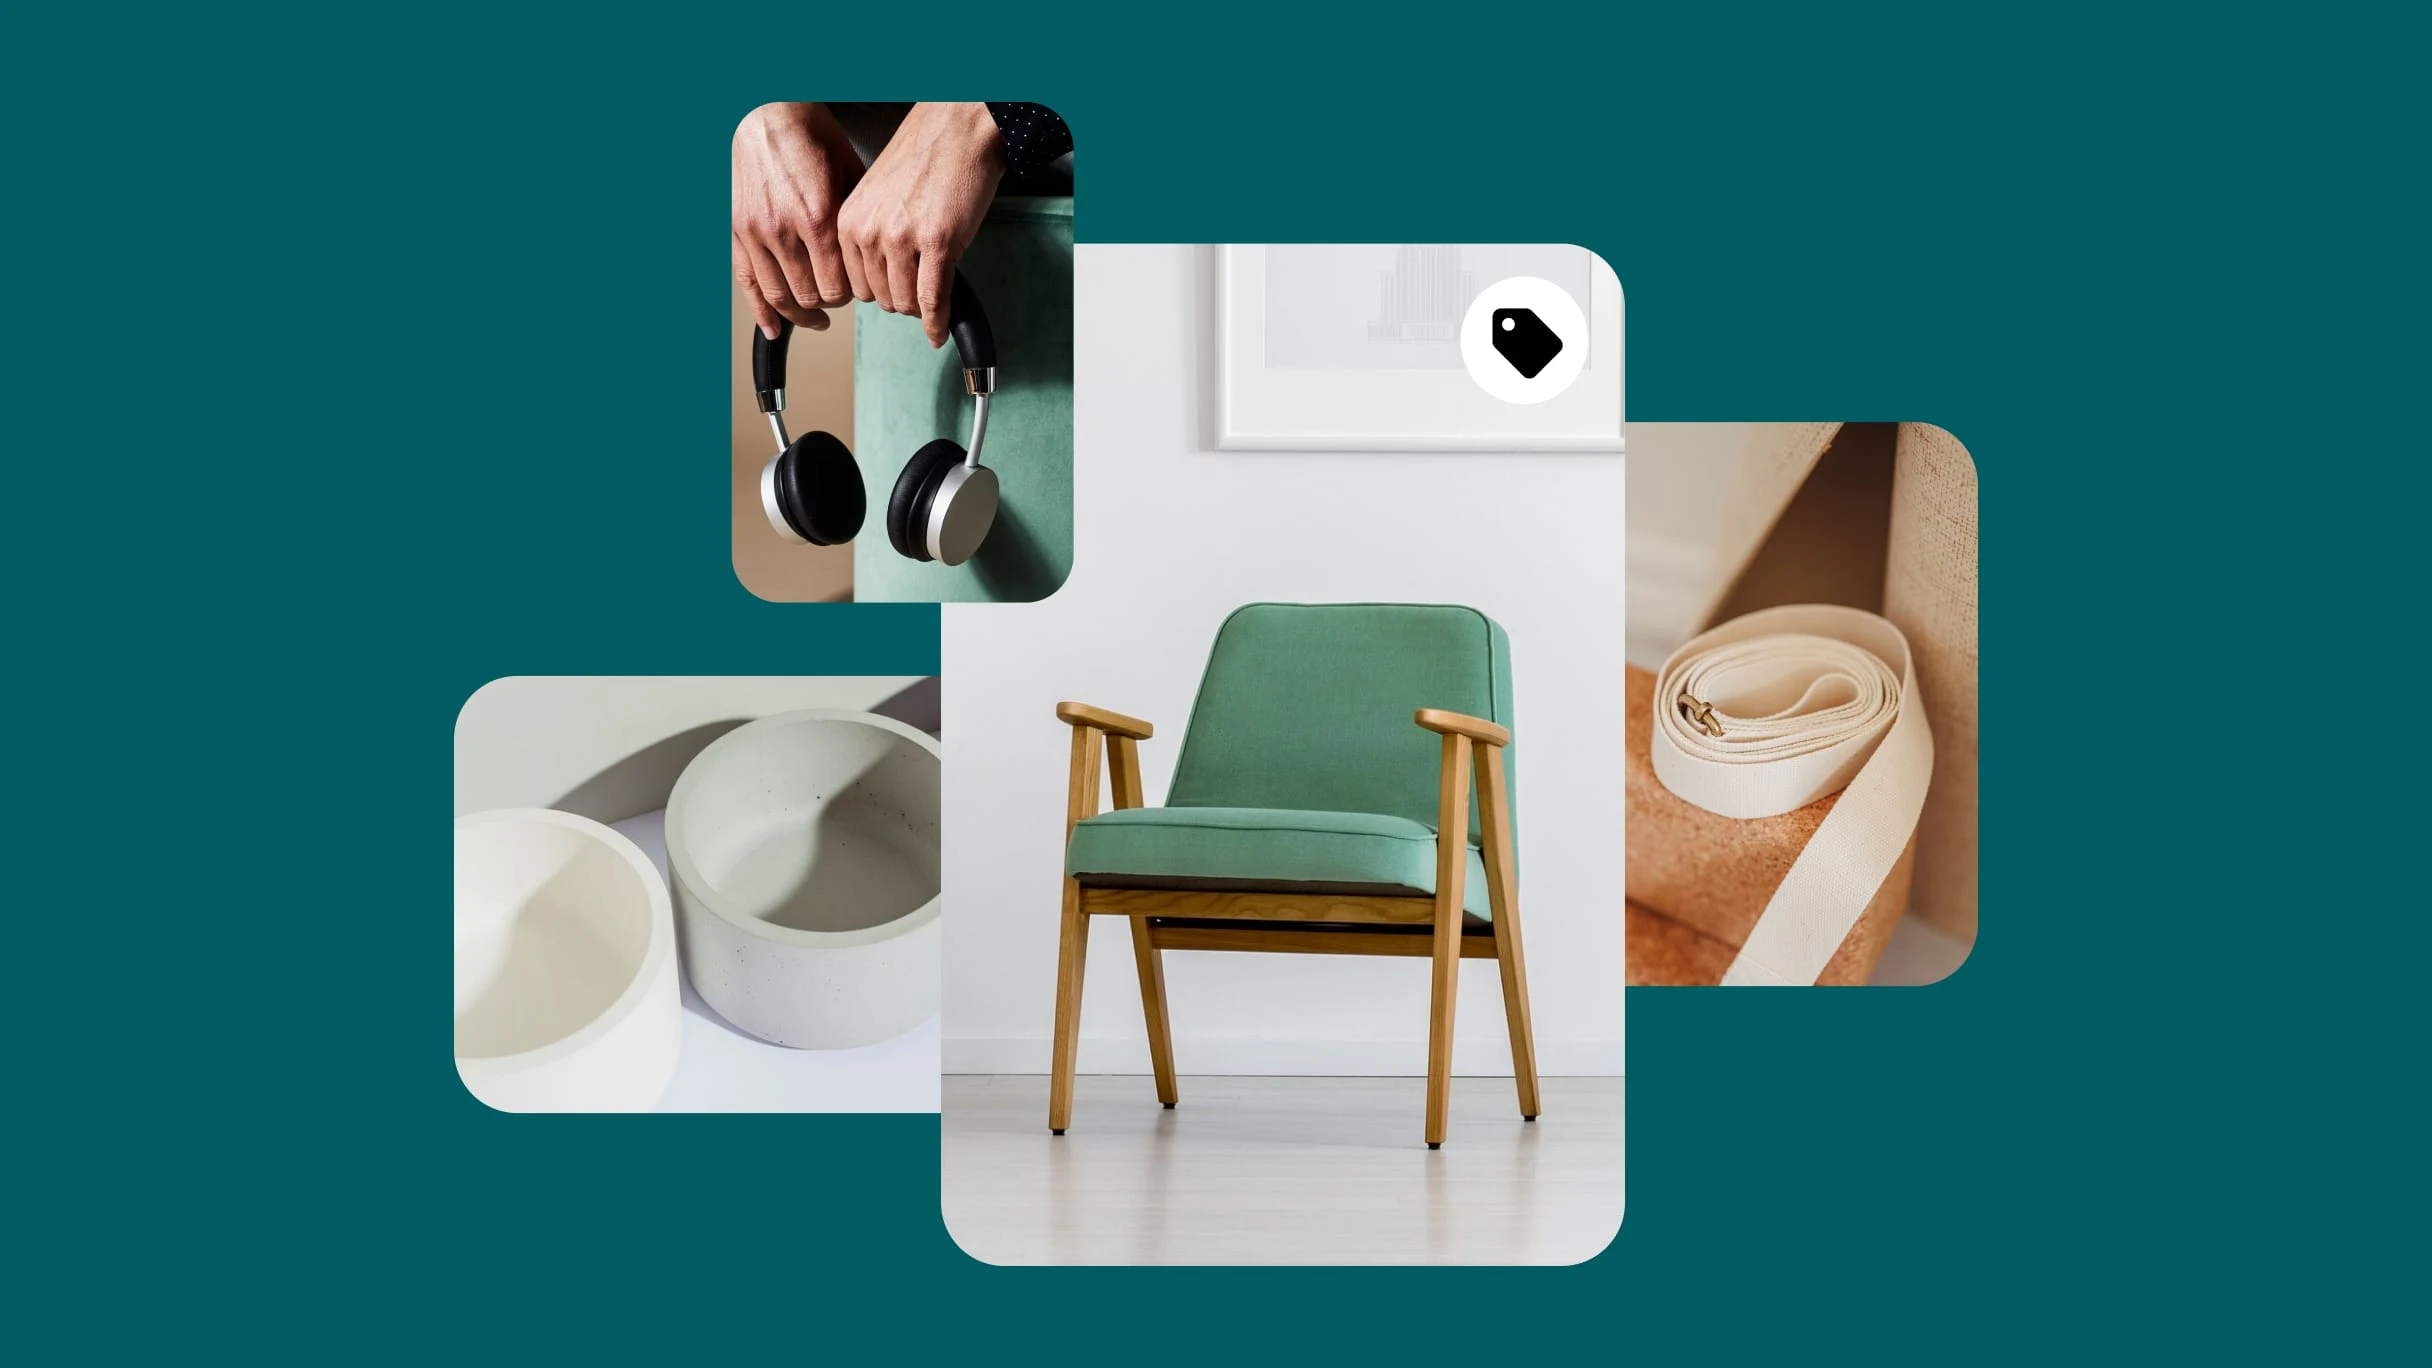  There are four images on a green background. On the left, is one white and one grey bowl. Above it, two hands are clutching silver headphones and a picture of a mint green chair. An image of a tan tape measure, sitting on top of a cork-coloured ledge. 